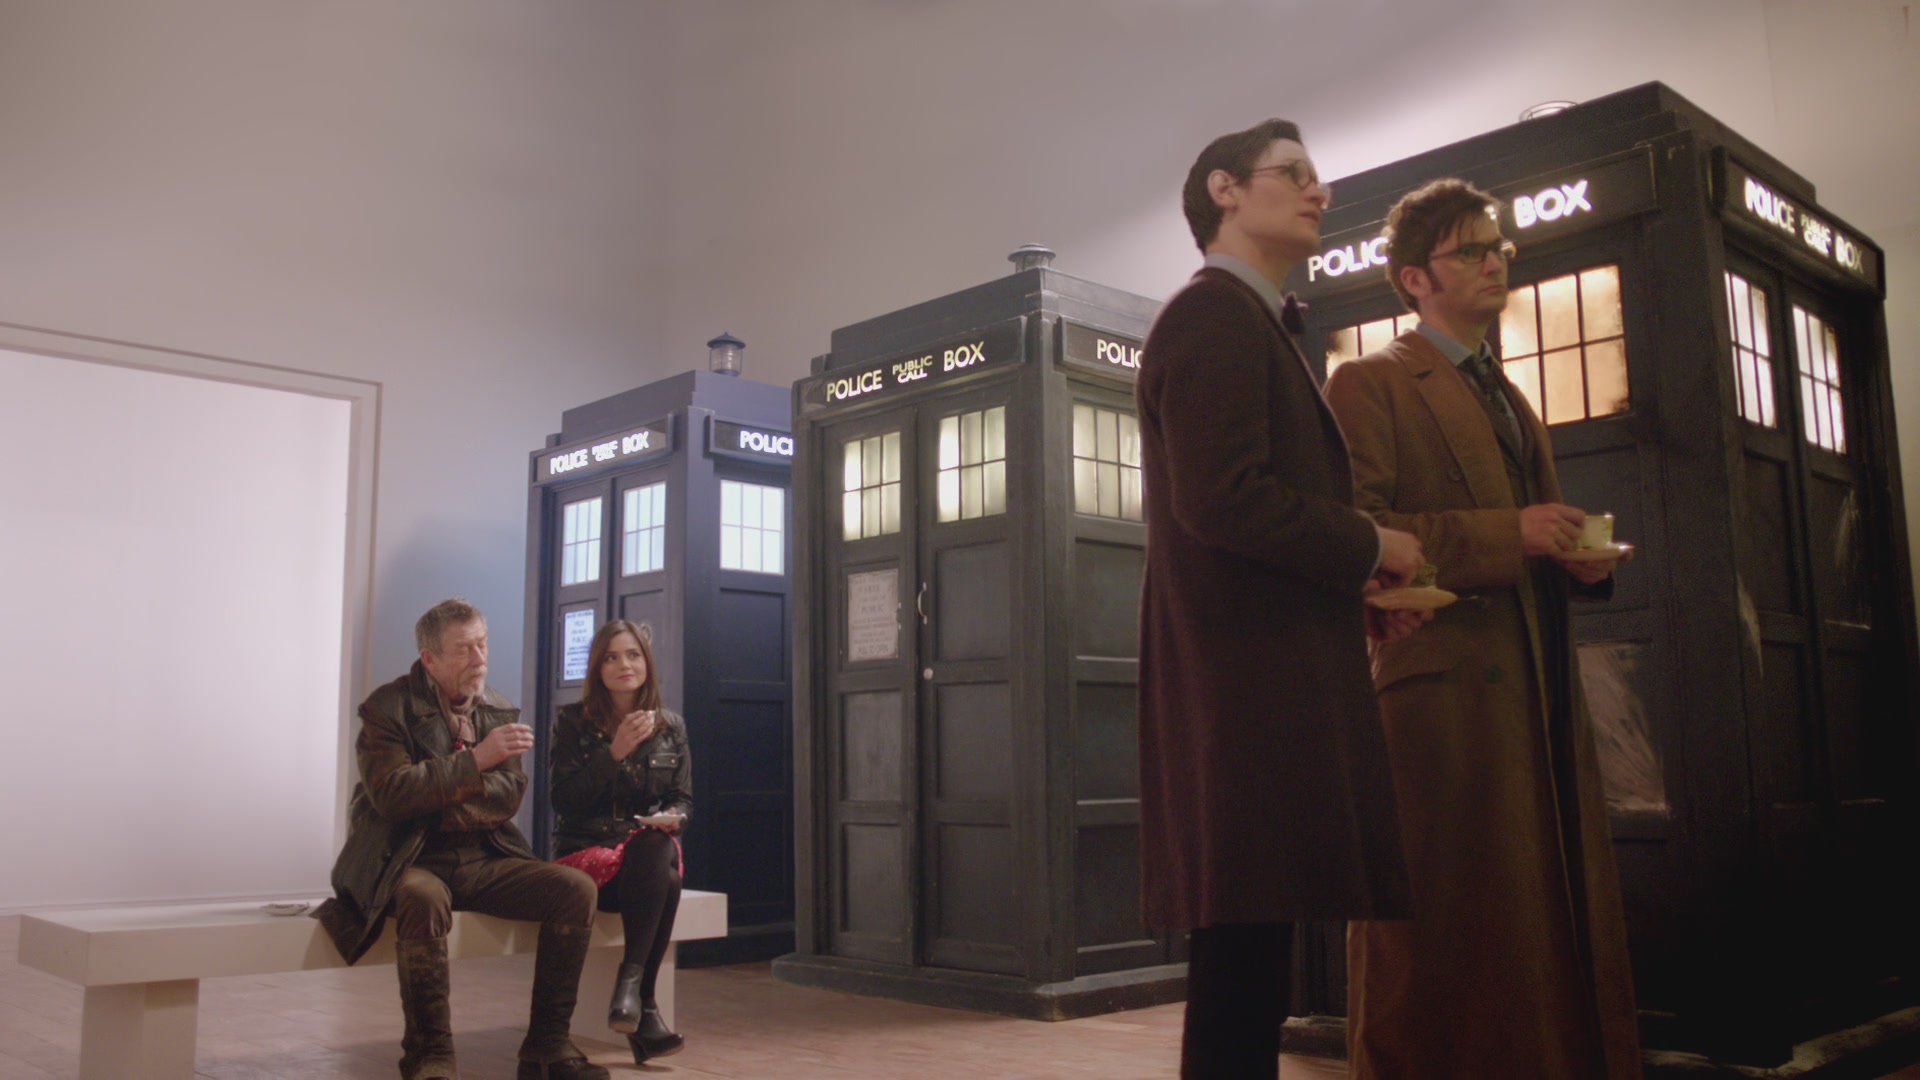 DayOfTheDoctor-Caps-1241.jpg